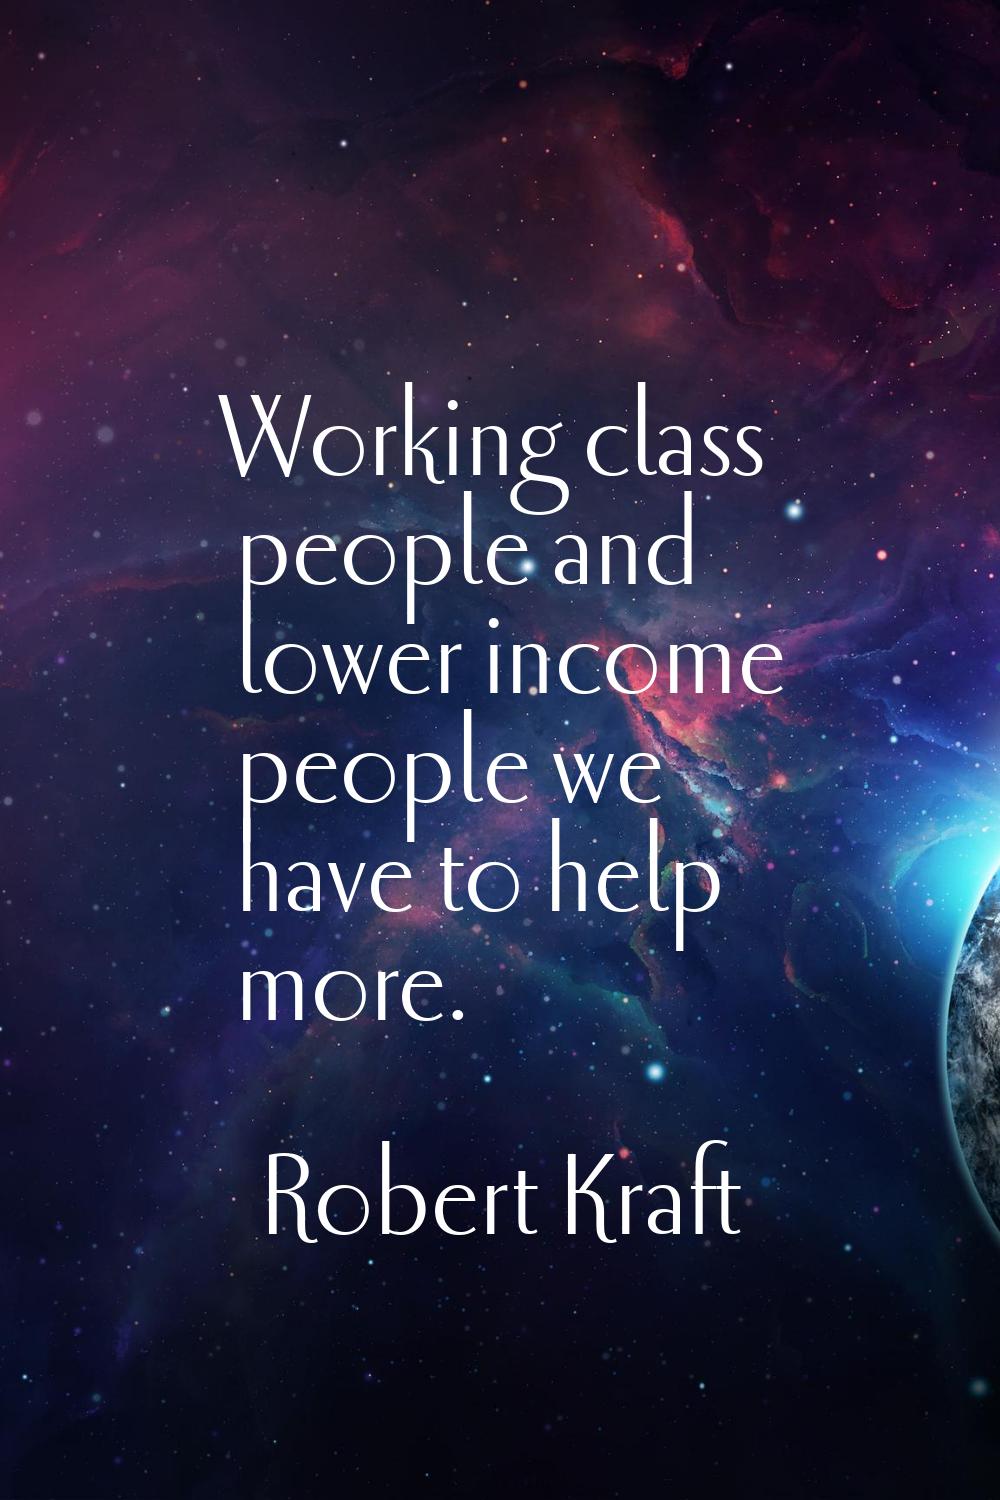 Working class people and lower income people we have to help more.